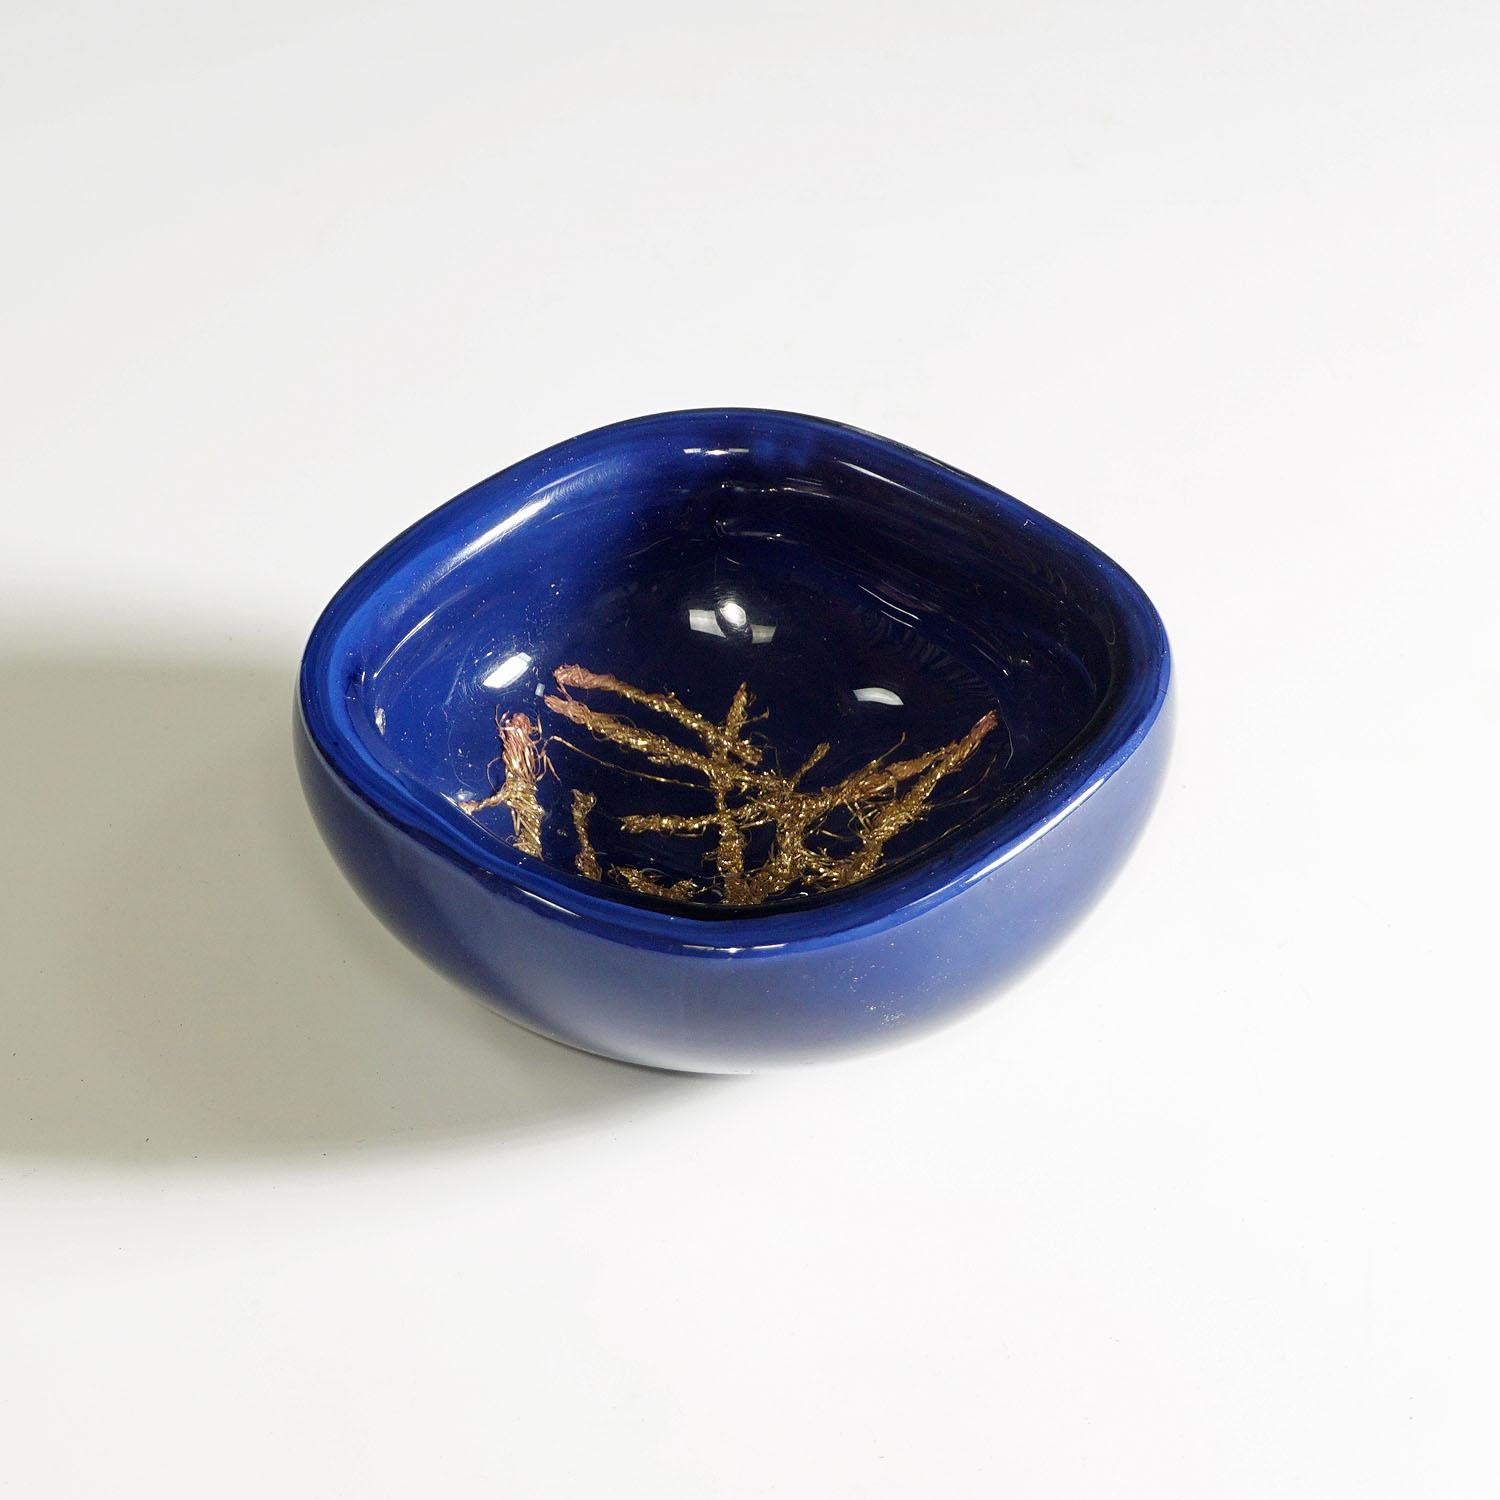 A bowl of the Giade series designed by Tony Zuccheri in 1964 and manufactured by Venini, Venice, Italy ca. 1960s. Multilayered glass with copper inclusions against a dark blue opaque background. The artglass is with incised signature 'venini italia'